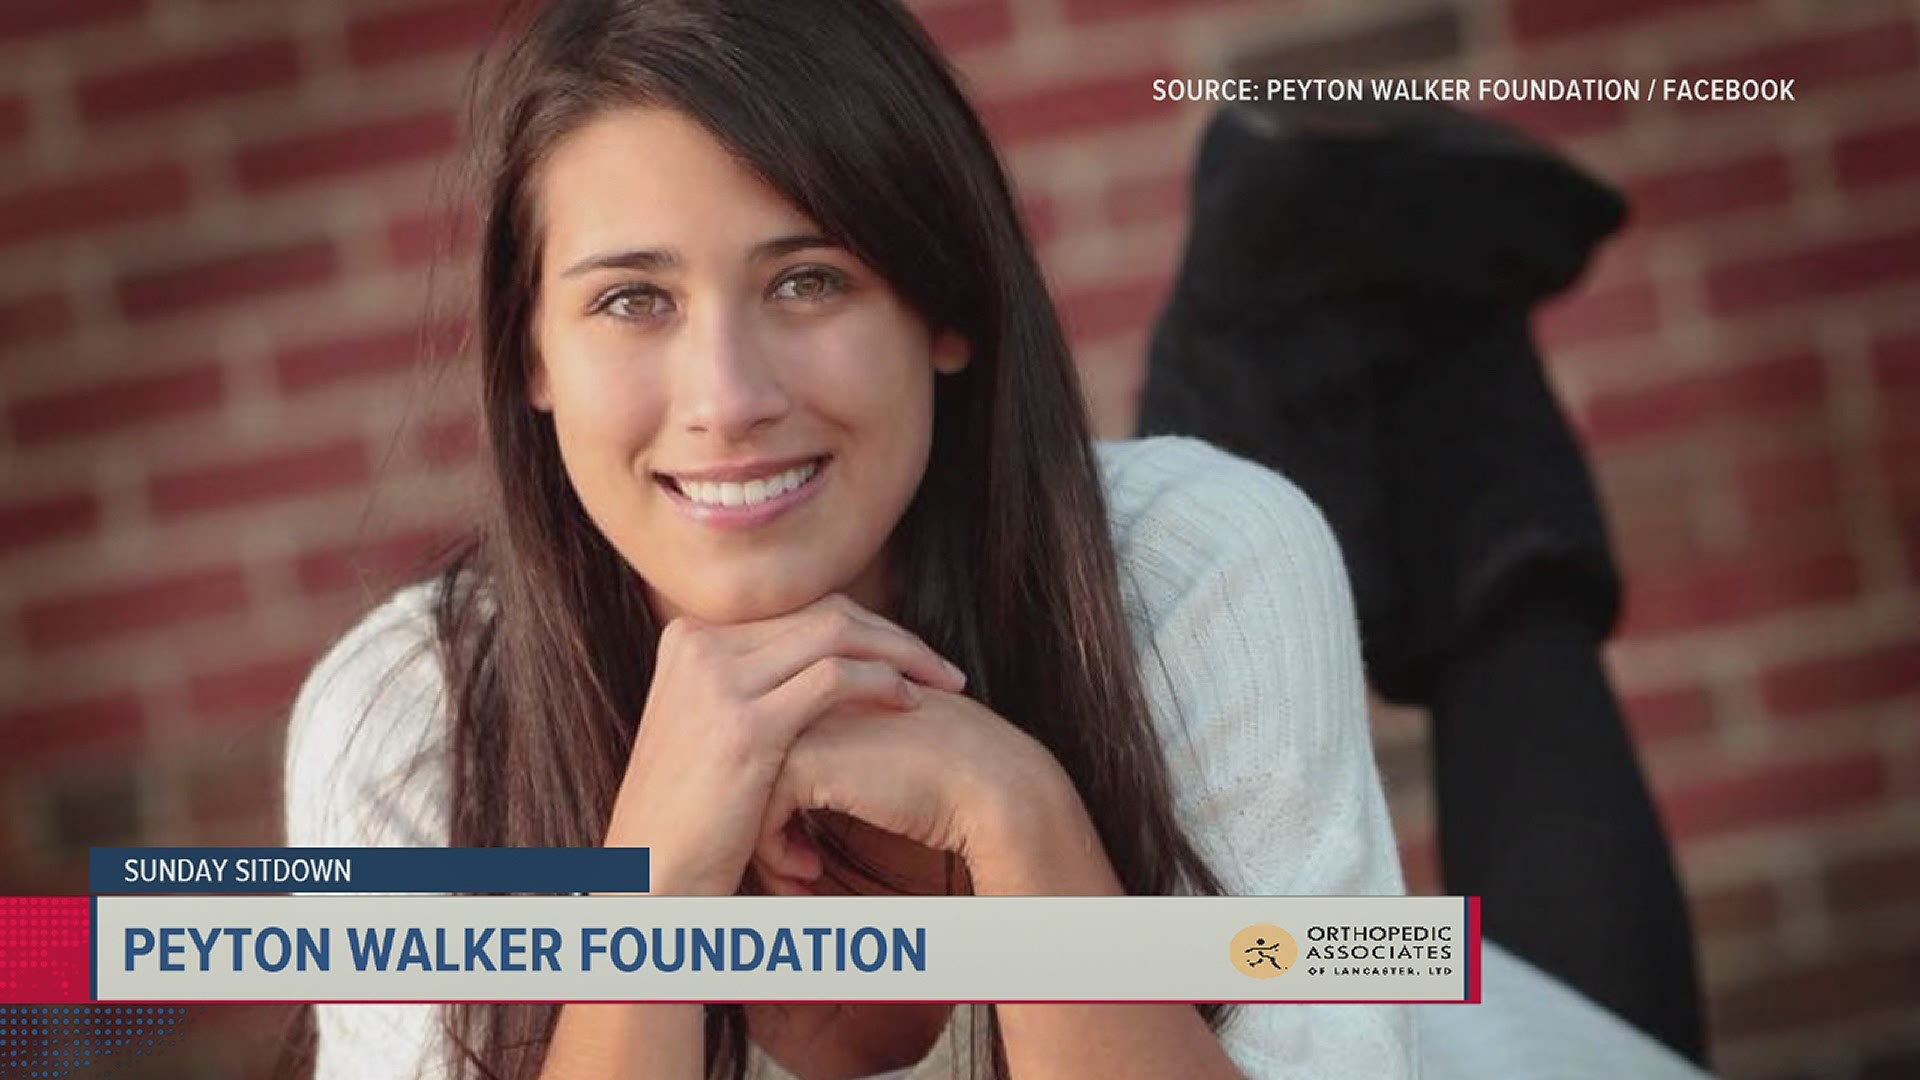 The Peyton Walker Foundation reaches new heights in 2020, having Peyton's Law unanimously passes in July.